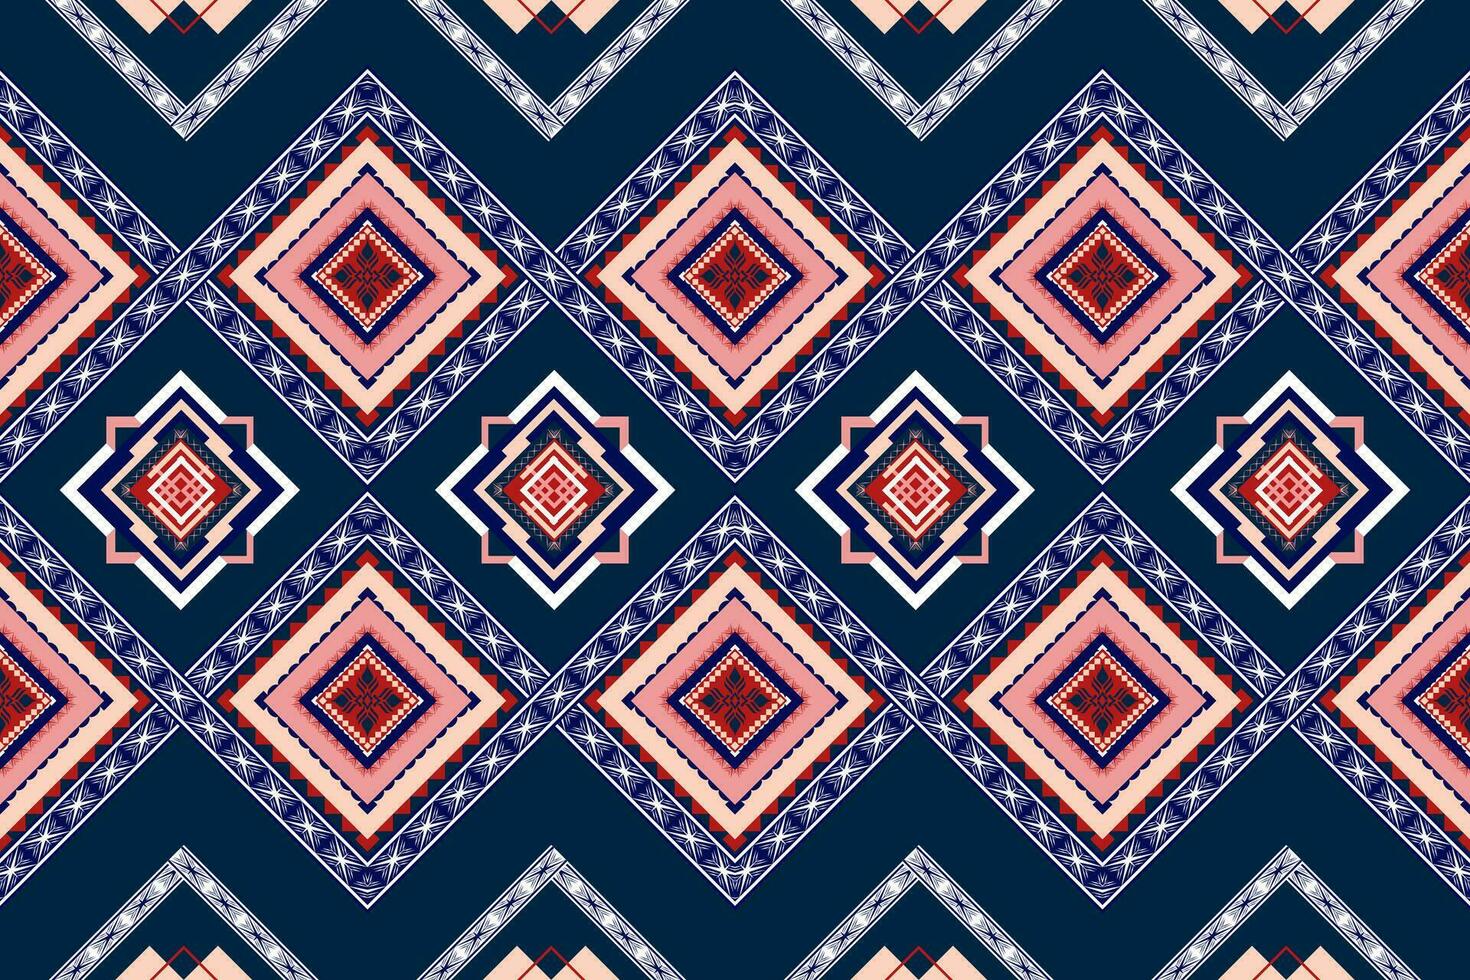 Abstract ethnic aztec geometric pattern design for background.Ethnic ikat geometric pattern for vibrant color.Colorful geometric embroidery for textiles,fabric,clothing,background,batik,knitwear vector